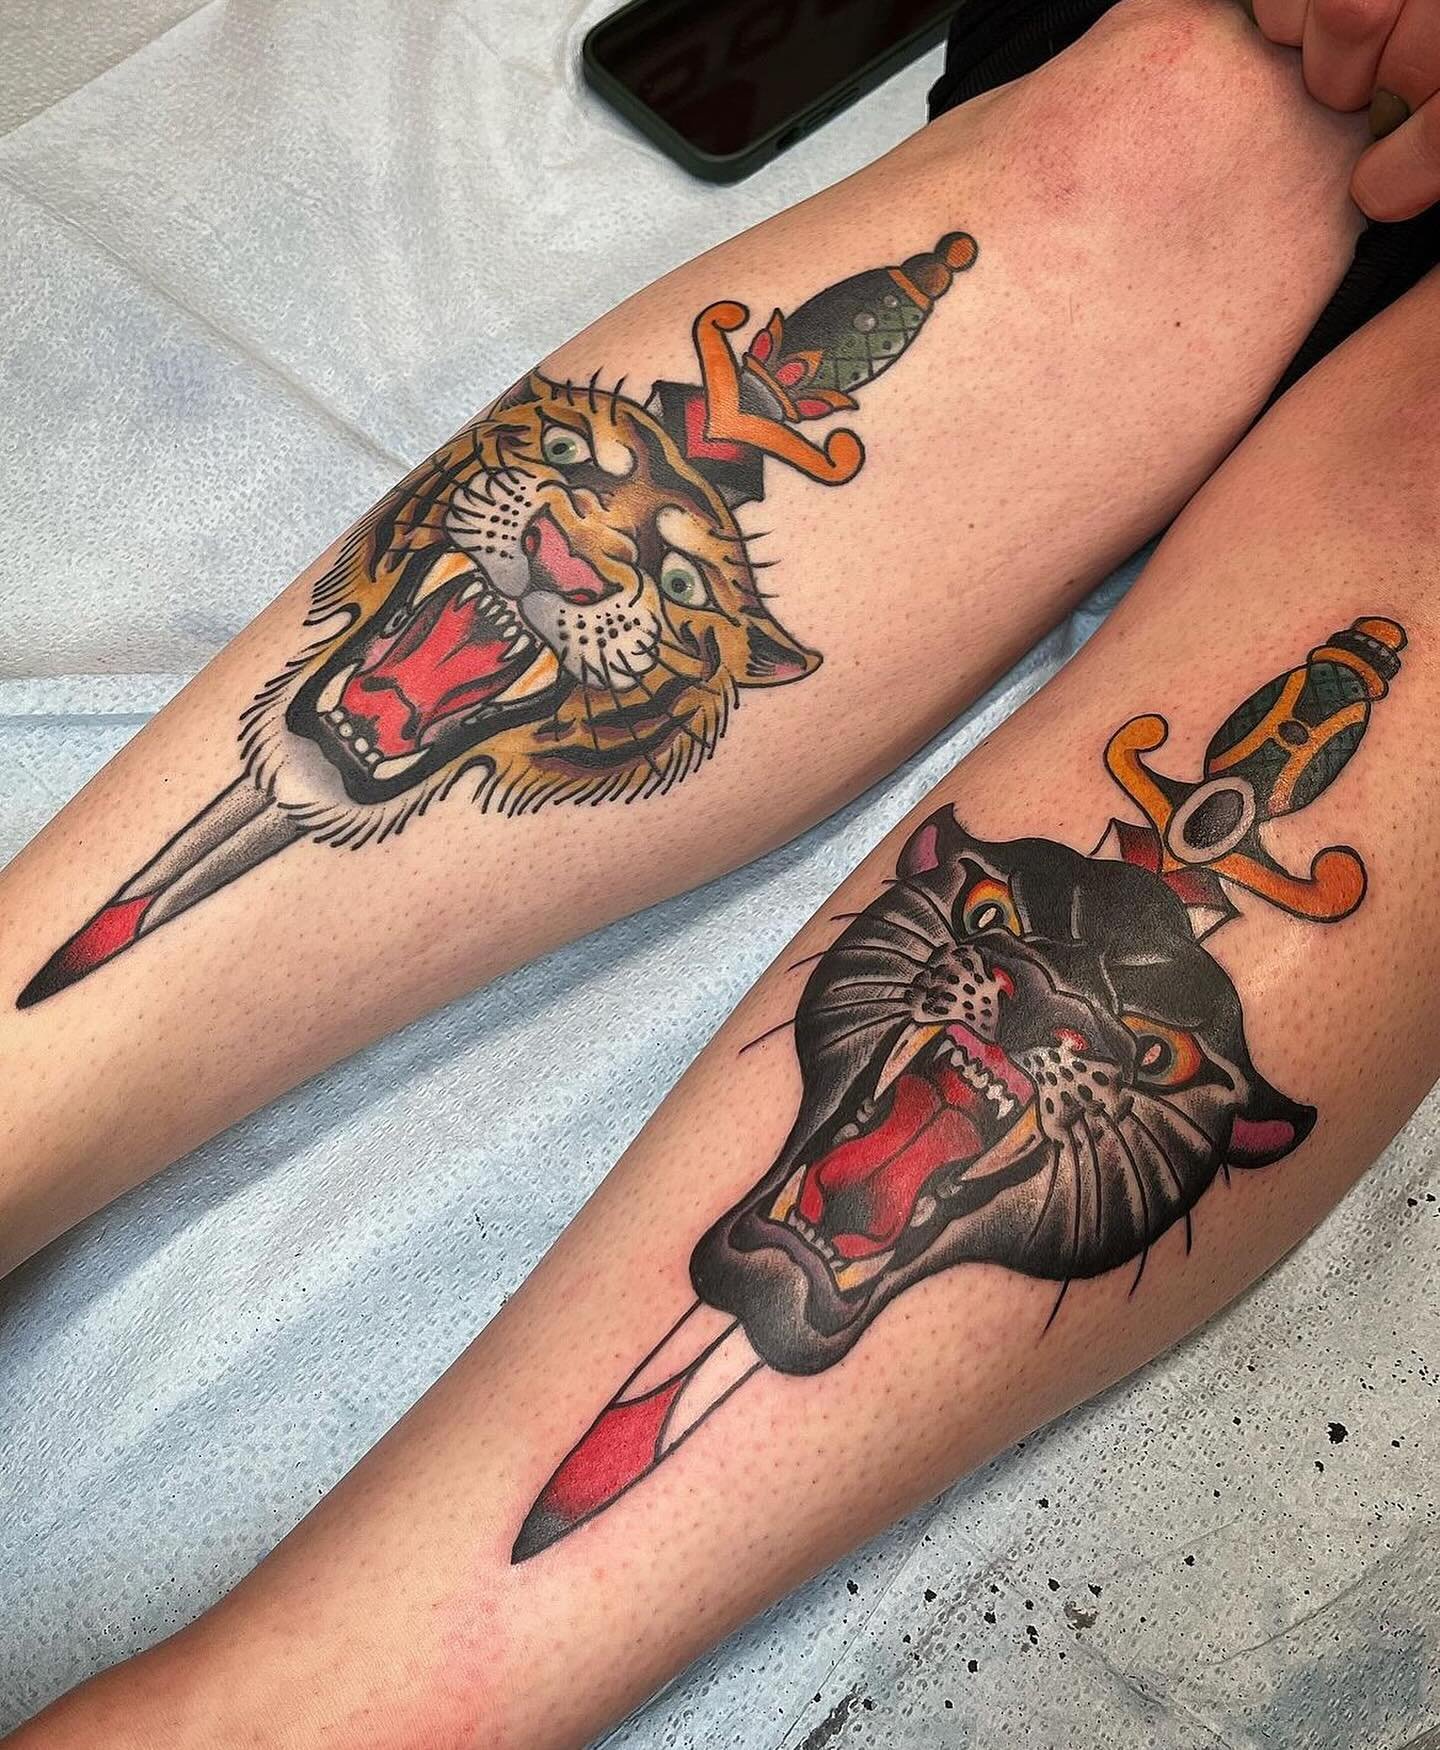 Double trouble from @mattcrary_tbobs. One big ol kitty healed and one new! If you&rsquo;re ready to get your paws on something new, stop on by the shop or message him at 314-940-3050 to set something up.